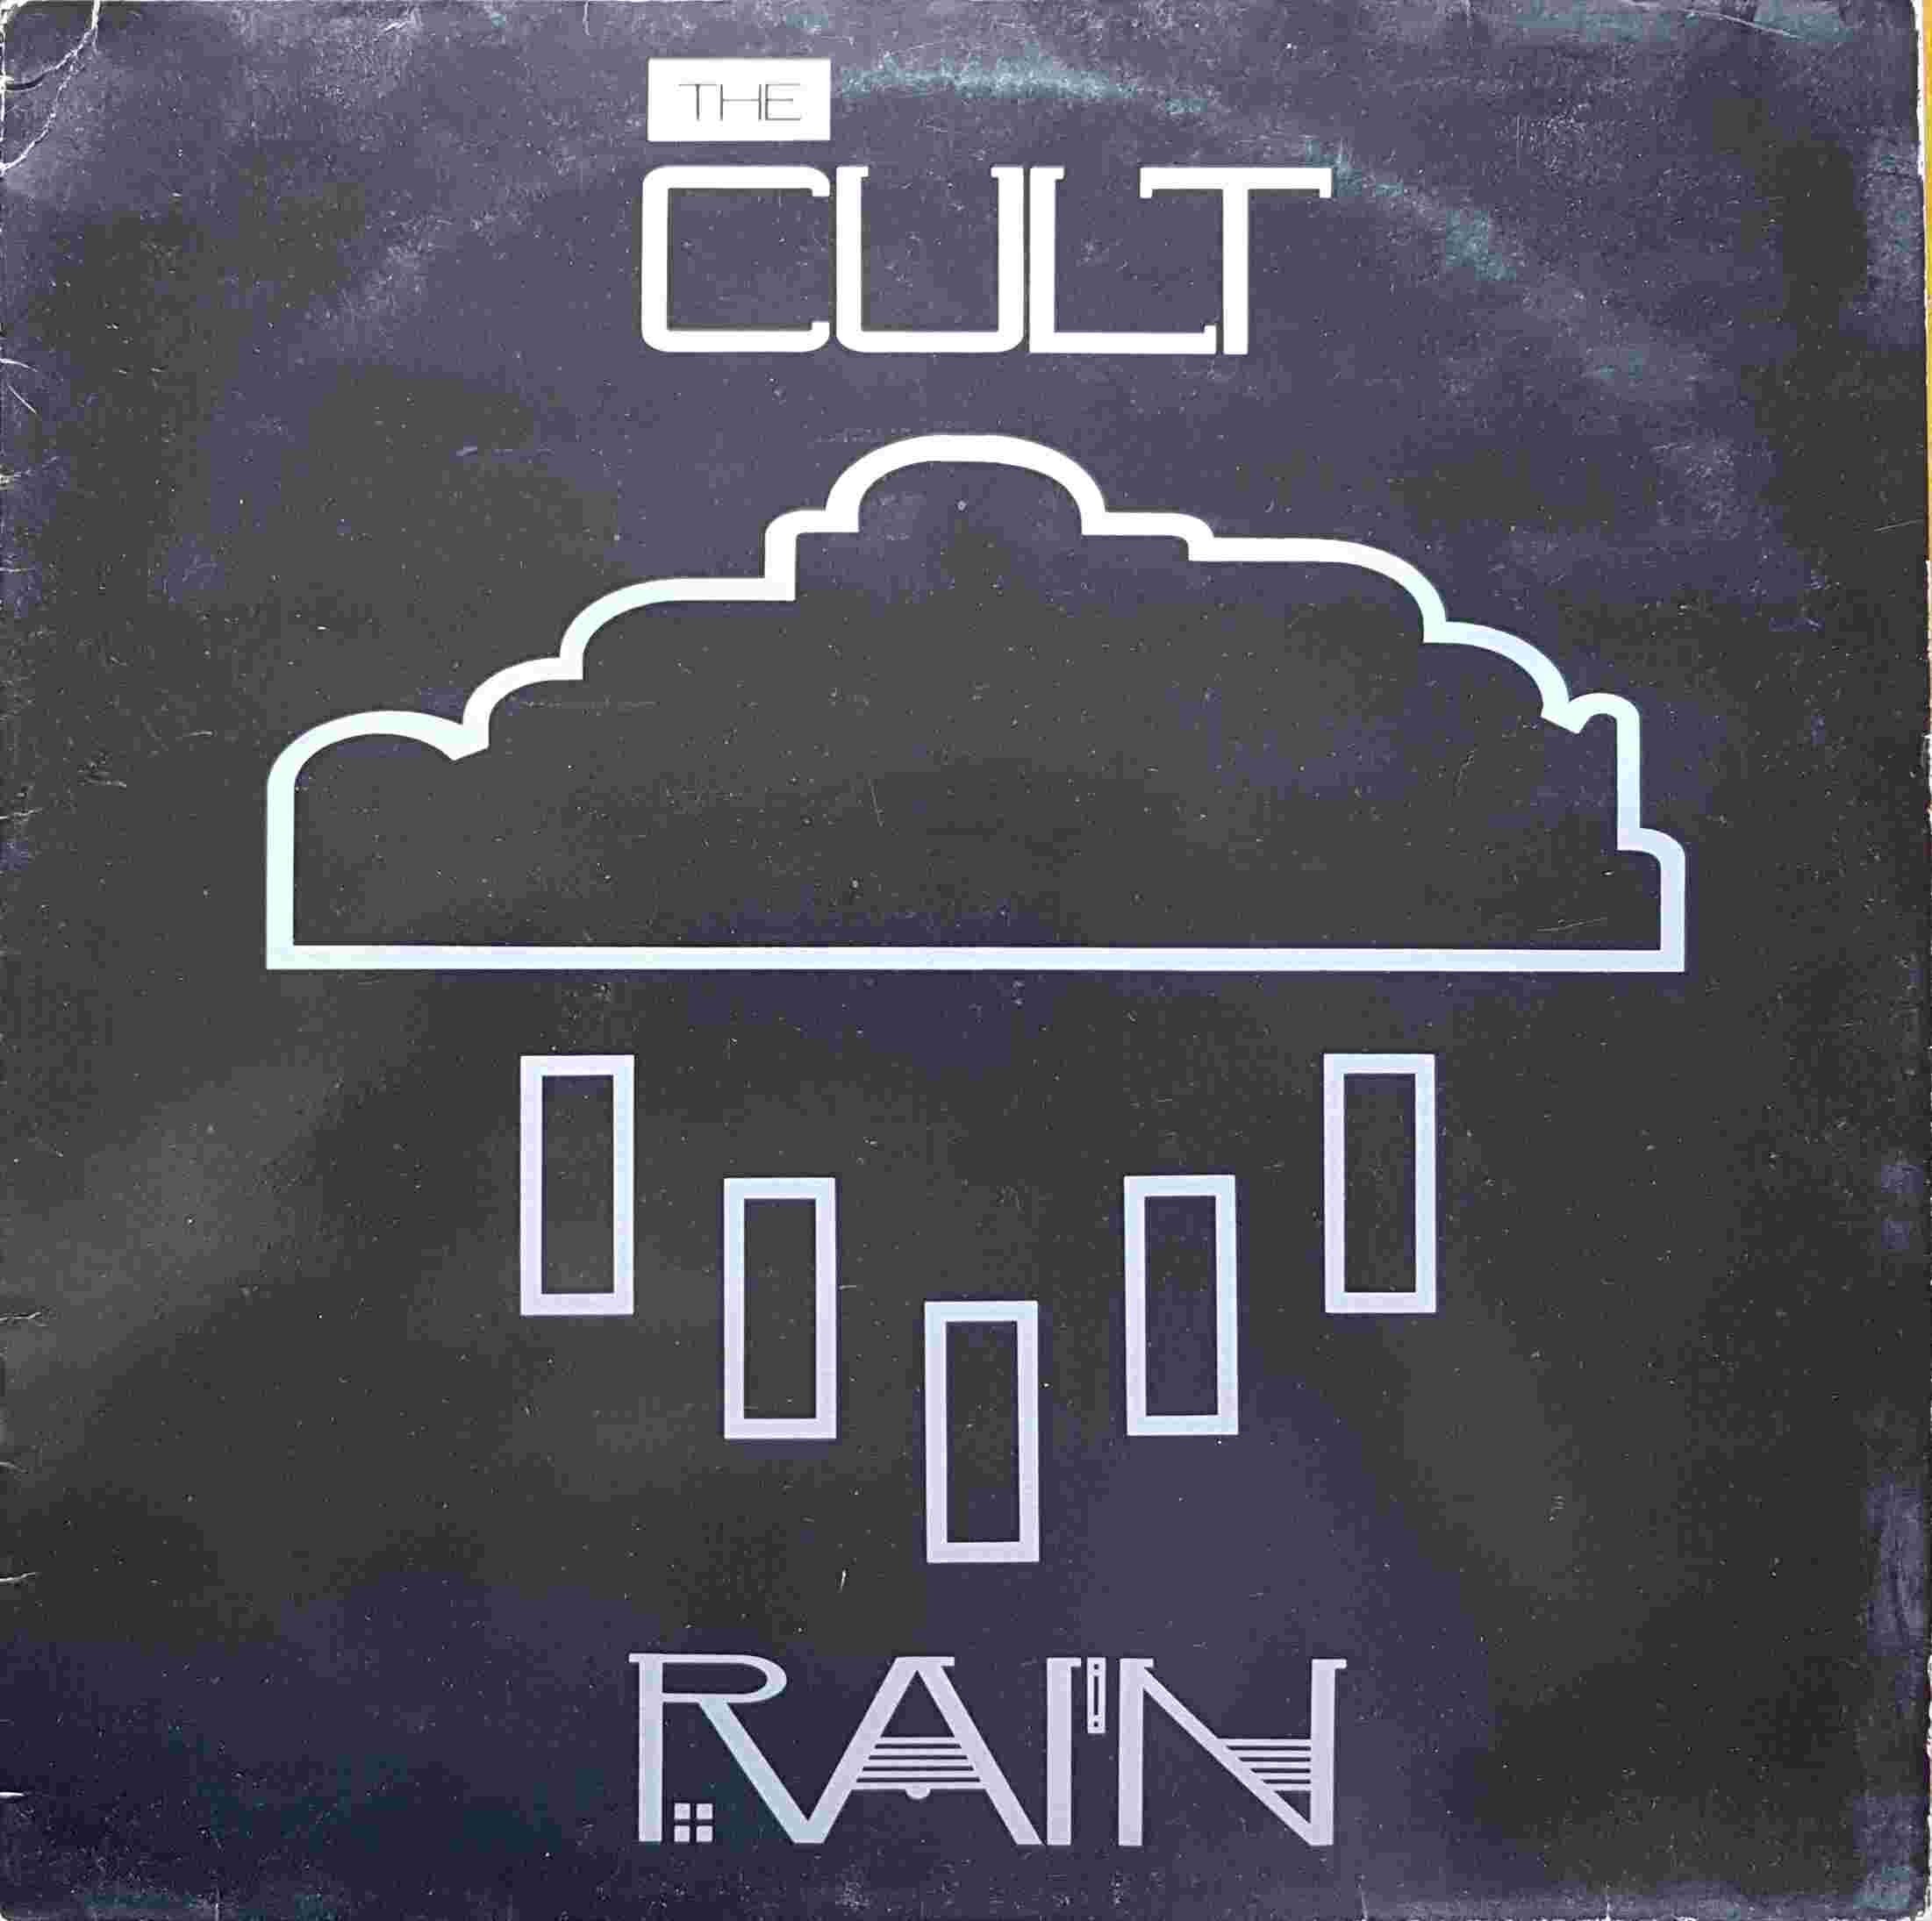 Picture of BEG 147 T Rain little face by artist Astbury / Duffy / The Cult 